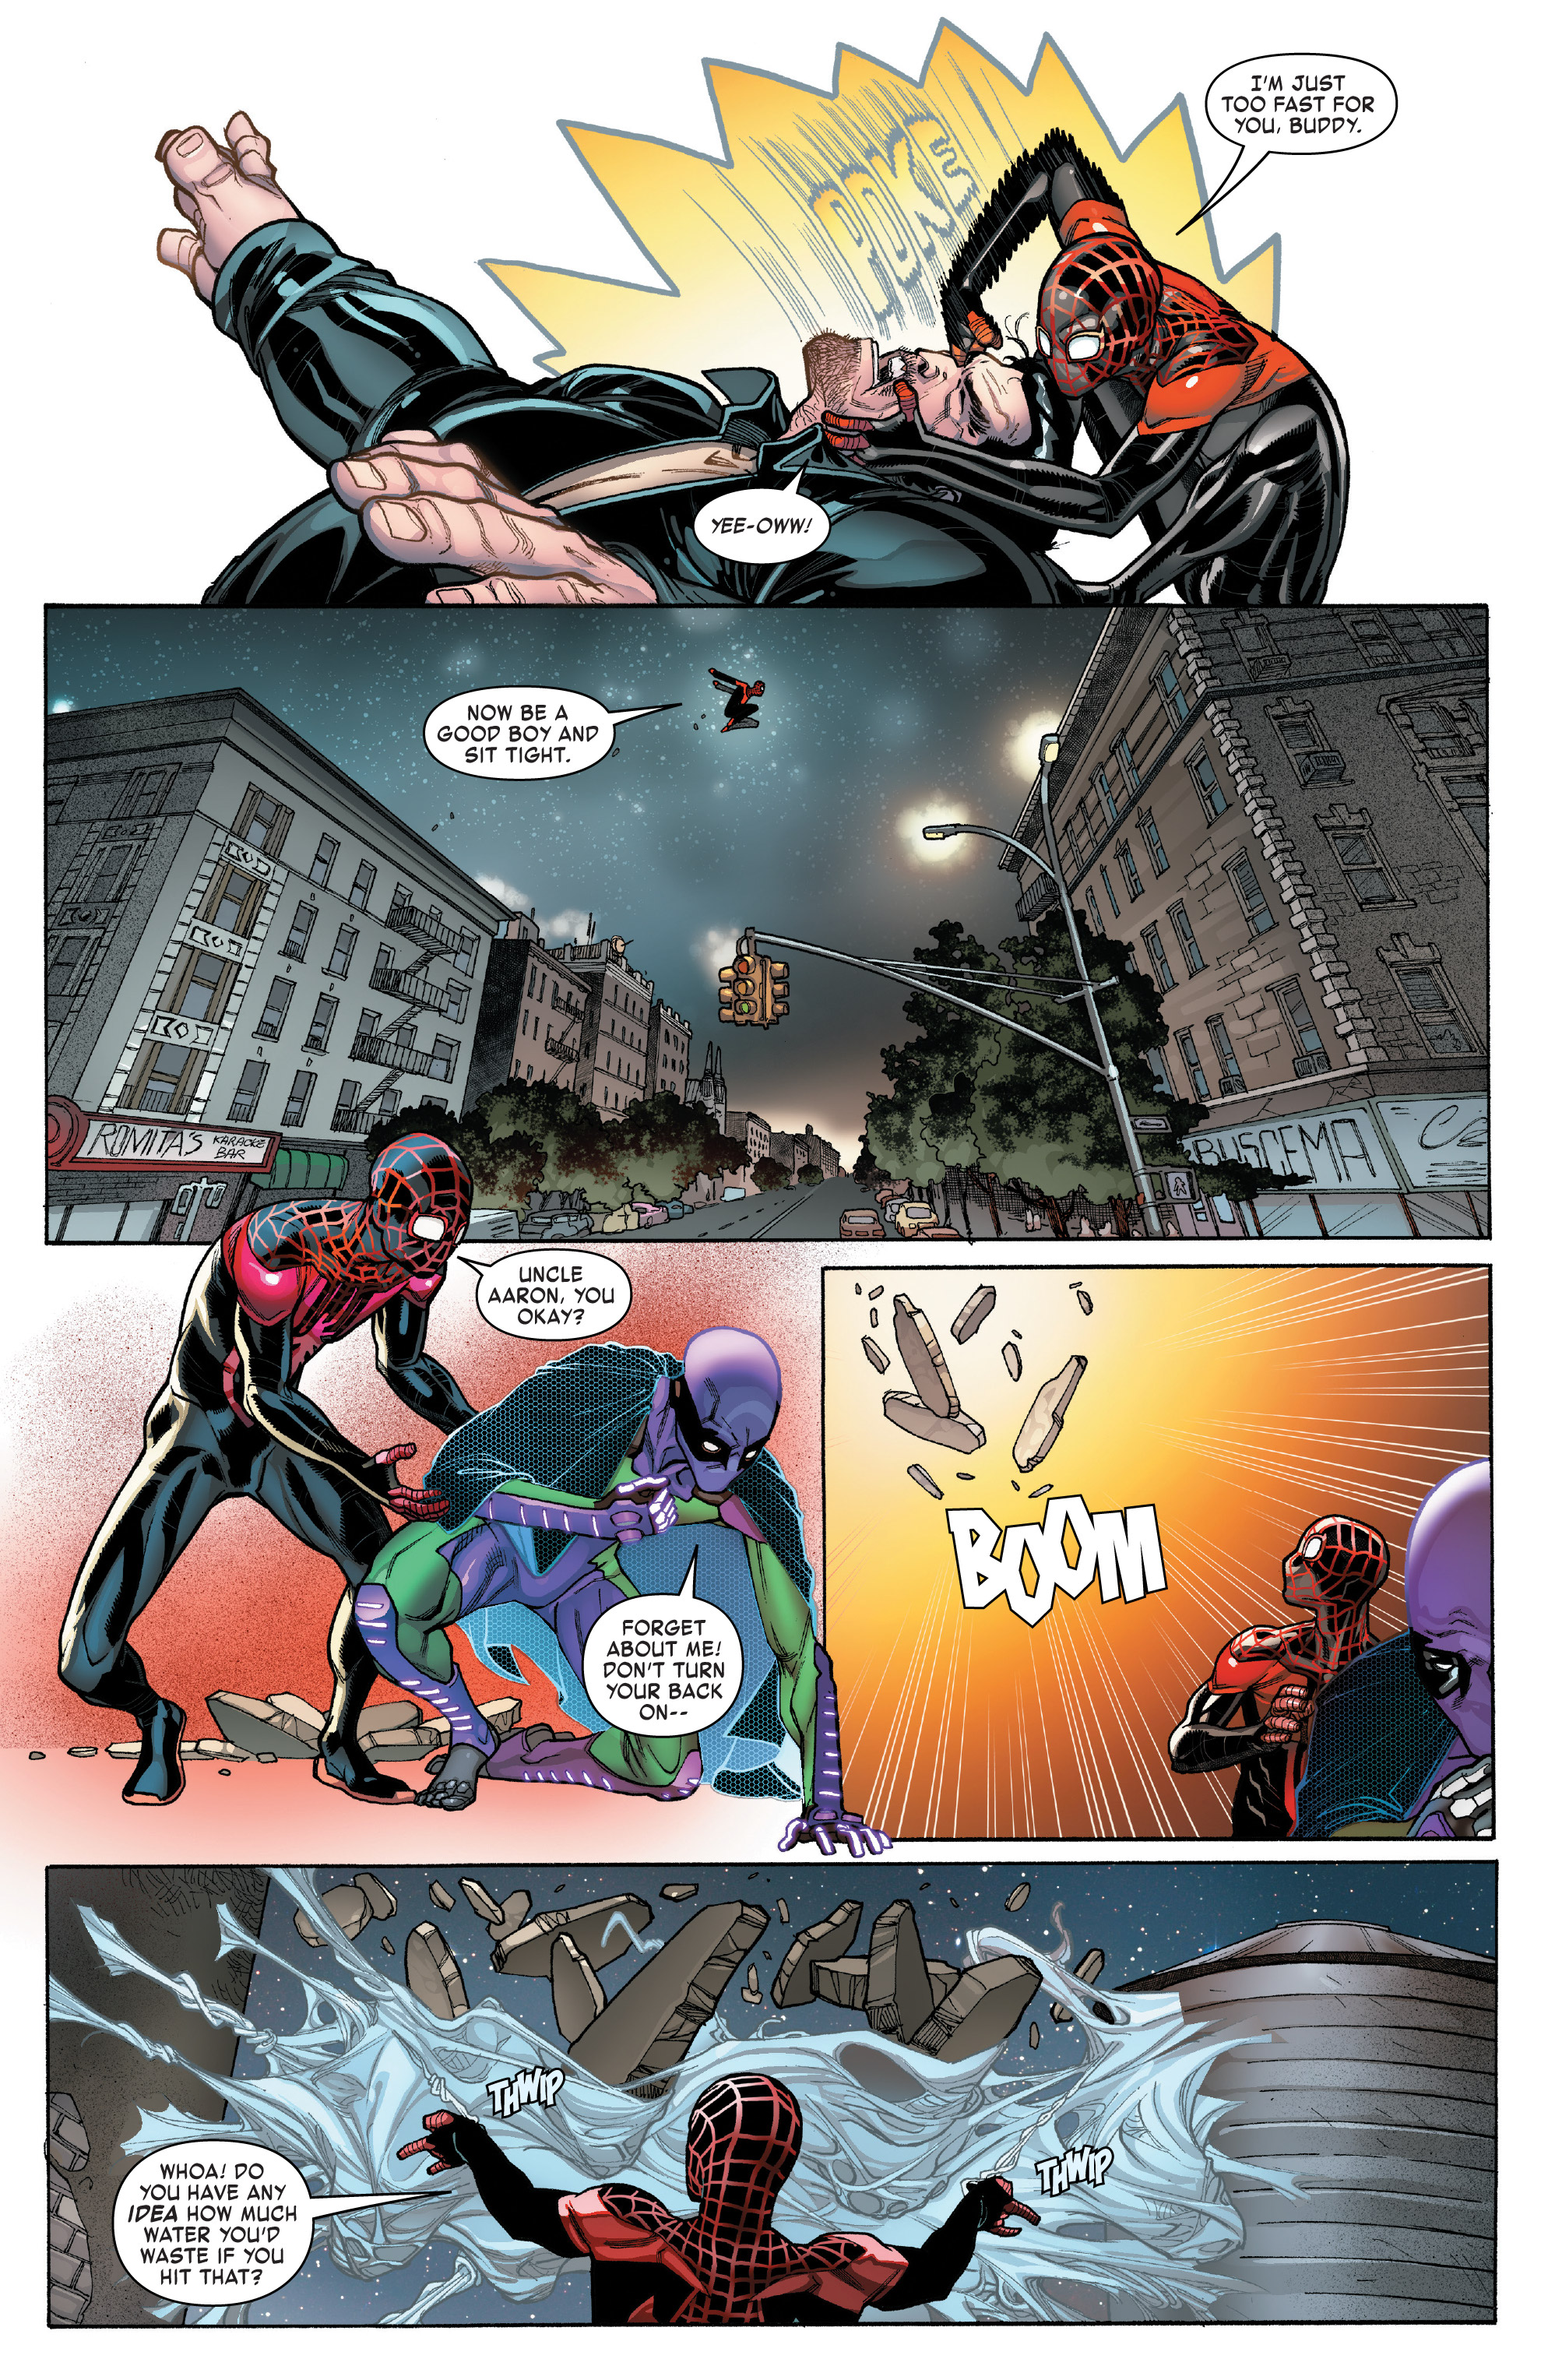 Miles Morales Spider Man Issue 12 | Read Miles Morales Spider Man Issue 12  comic online in high quality. Read Full Comic online for free - Read comics  online in high quality .| READ COMIC ONLINE